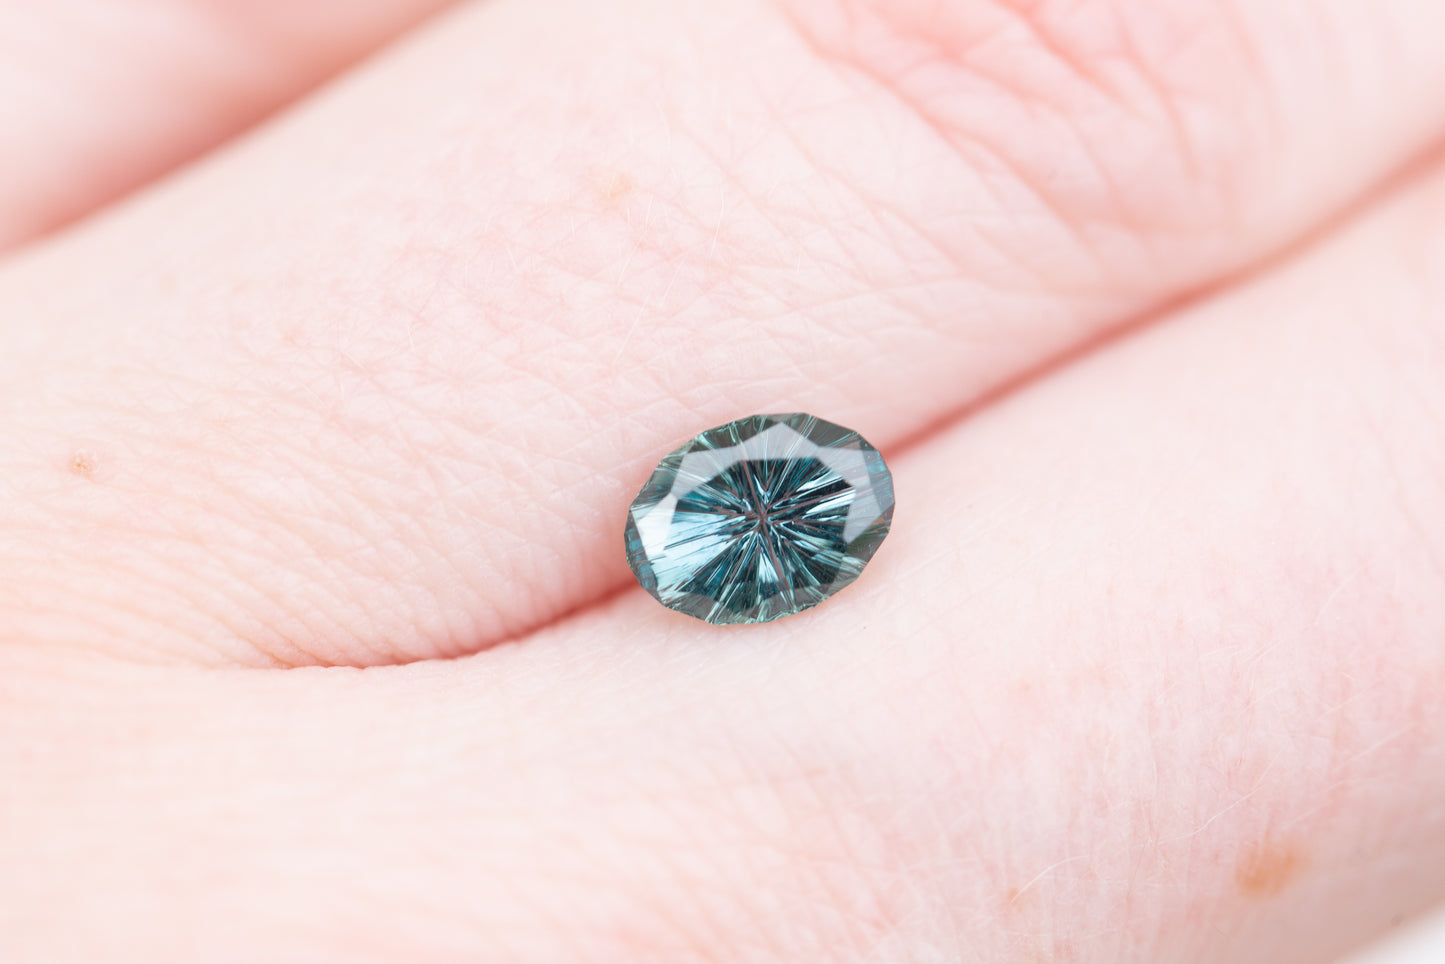 Load image into Gallery viewer, 1.13ct oval teal sapphire - starbrite cut by John Dyer
